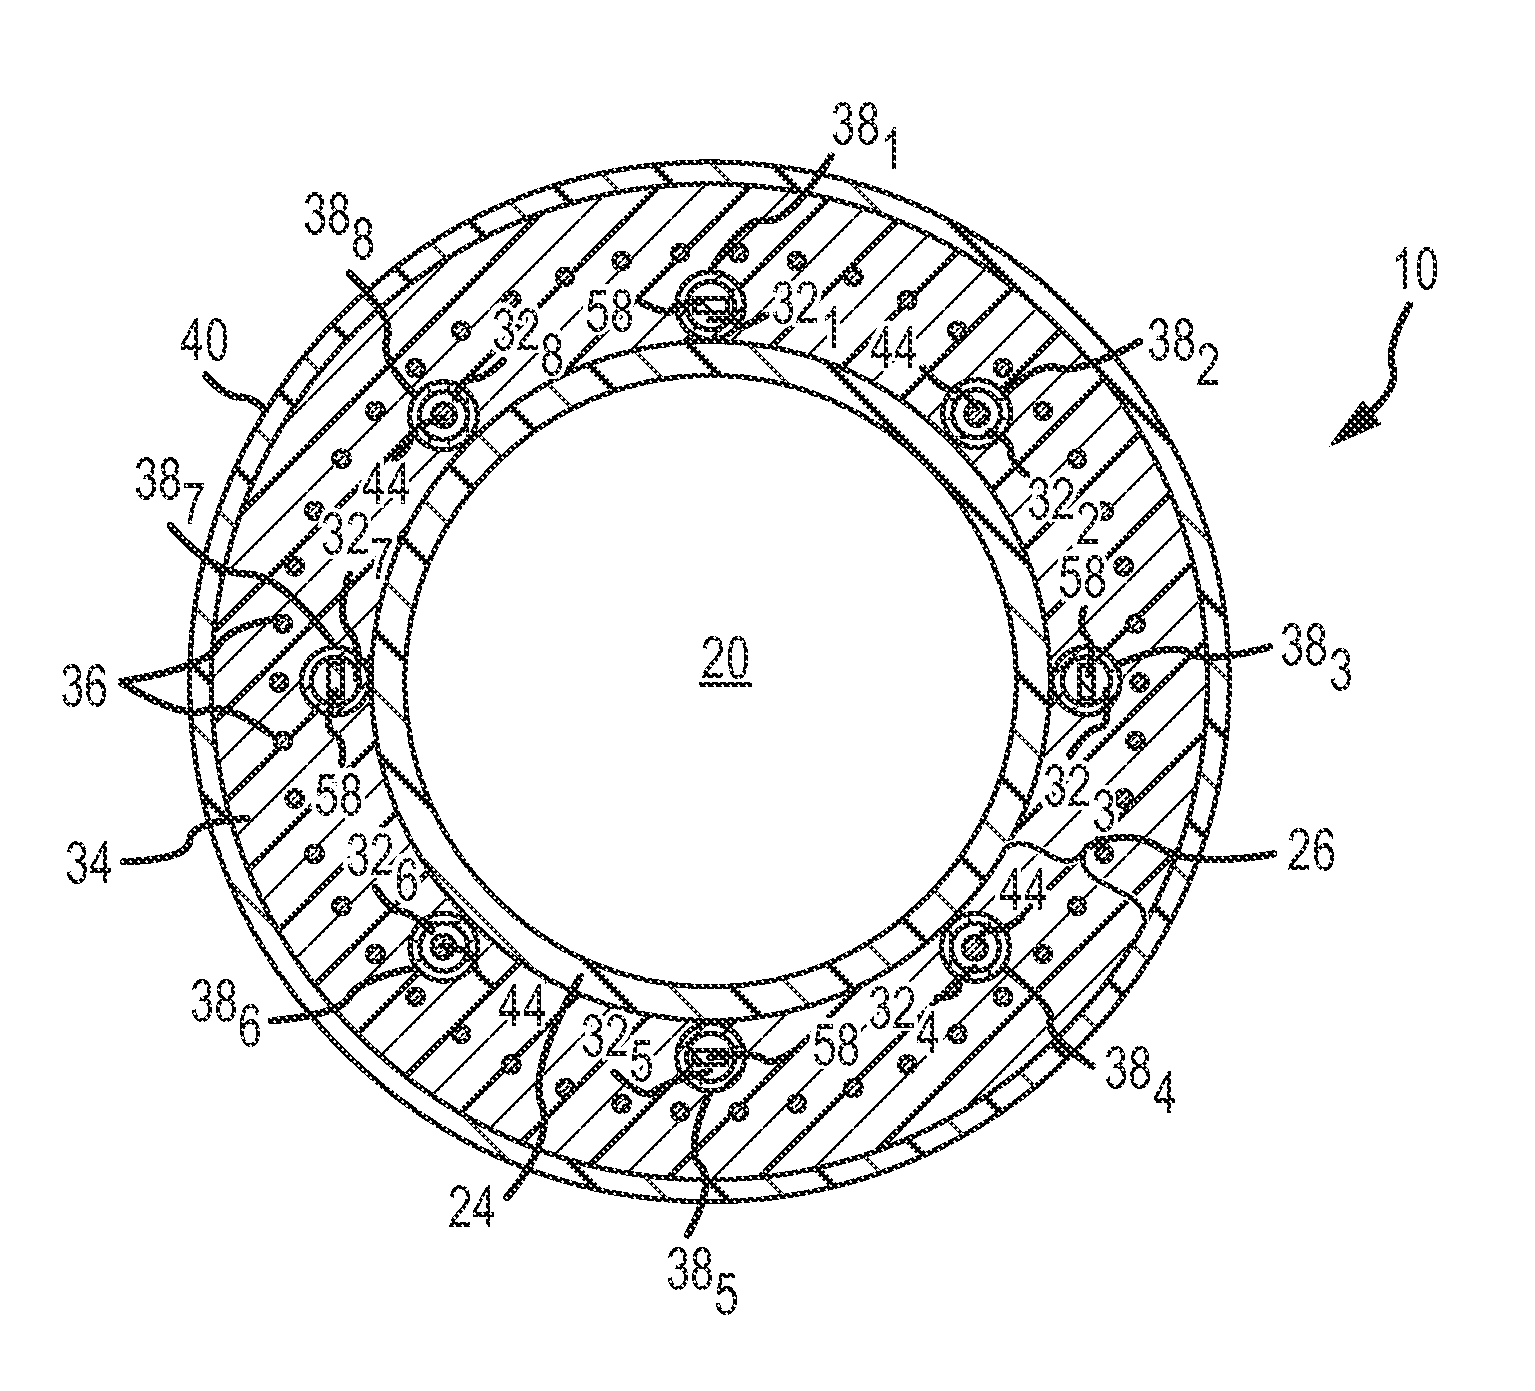 Medical devices having an electroanatomical system imaging element mounted thereon